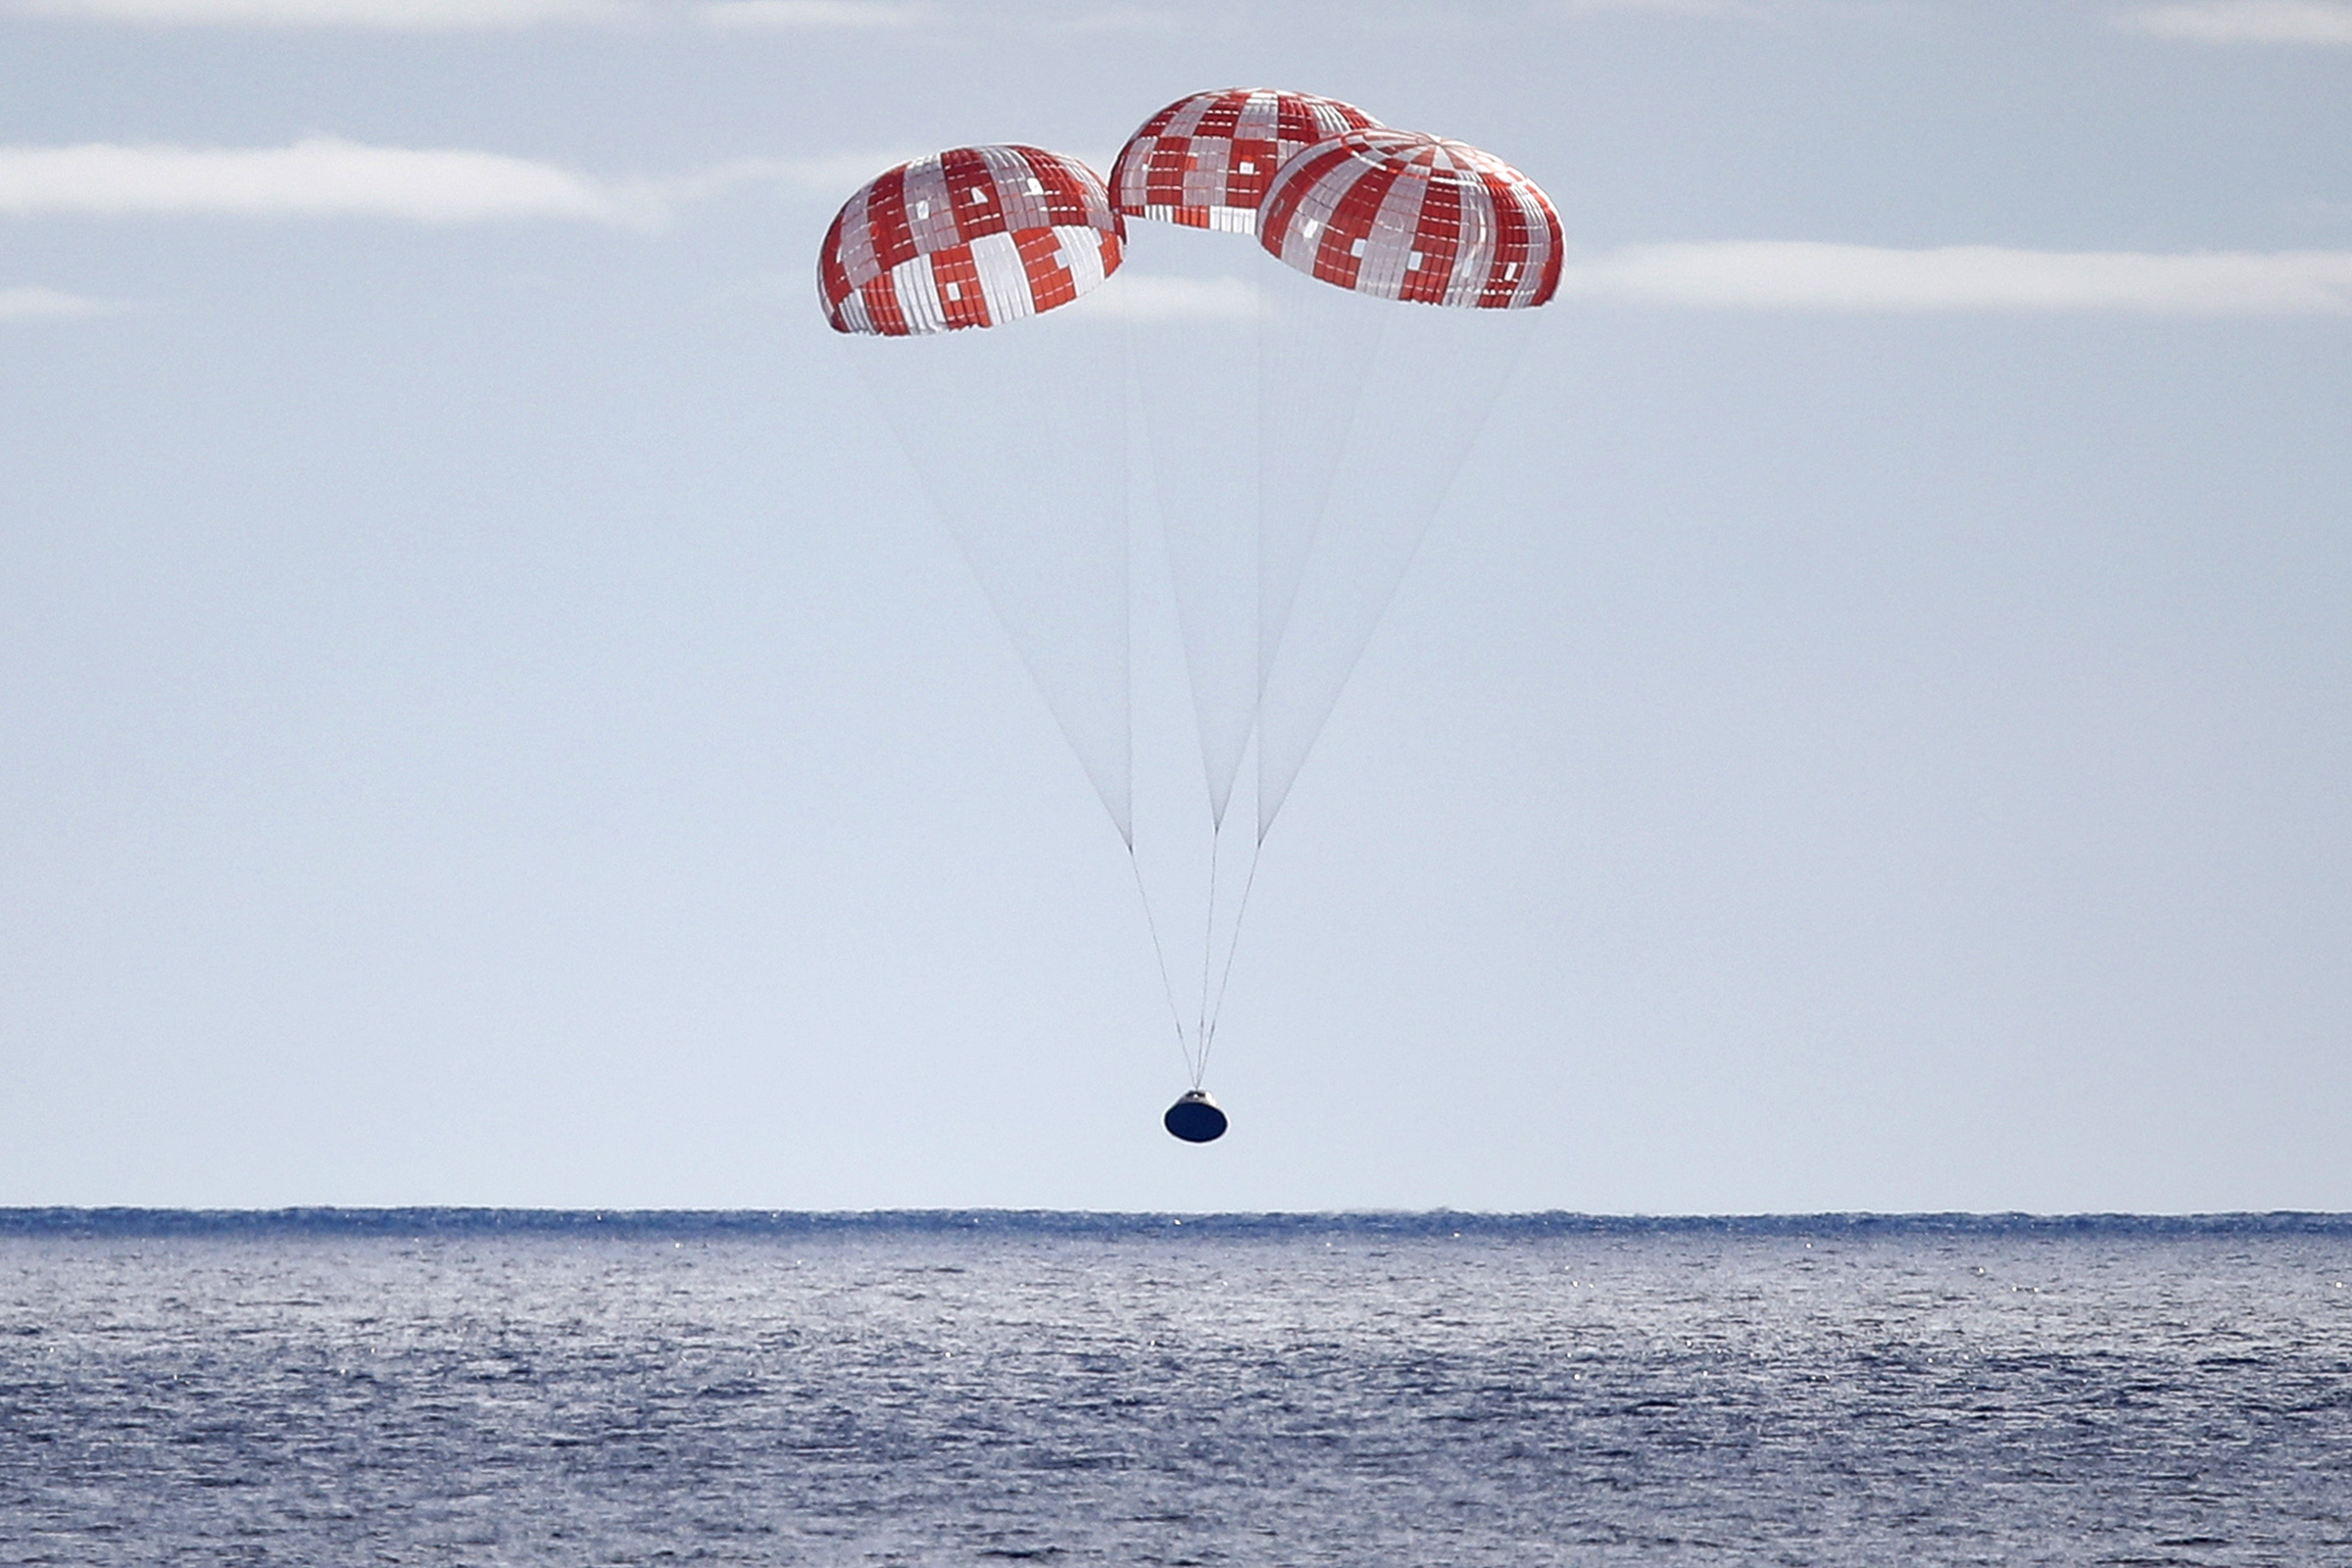 NASA’s Orion capsule splashes down in the Pacific Ocean off the coast of Baja California, Mexico after a successful uncrewed Artemis I moon mission on December 11, 2022.